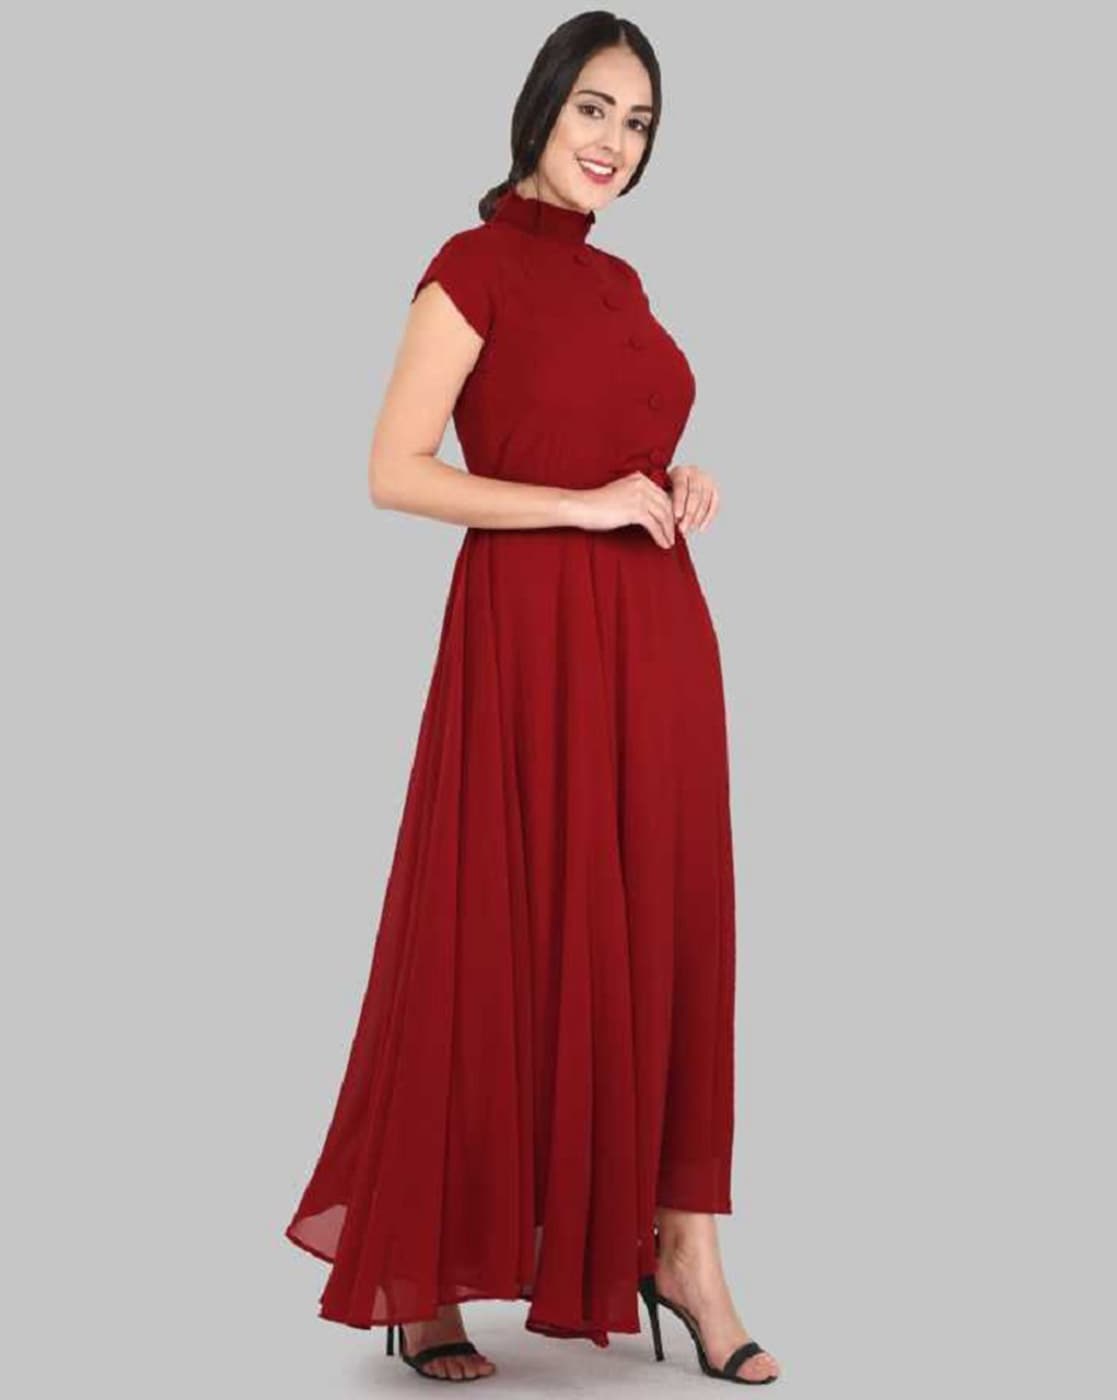 kaladwar Flared/A-line Gown Price in India - Buy kaladwar Flared/A-line Gown  online at Flipkart.com